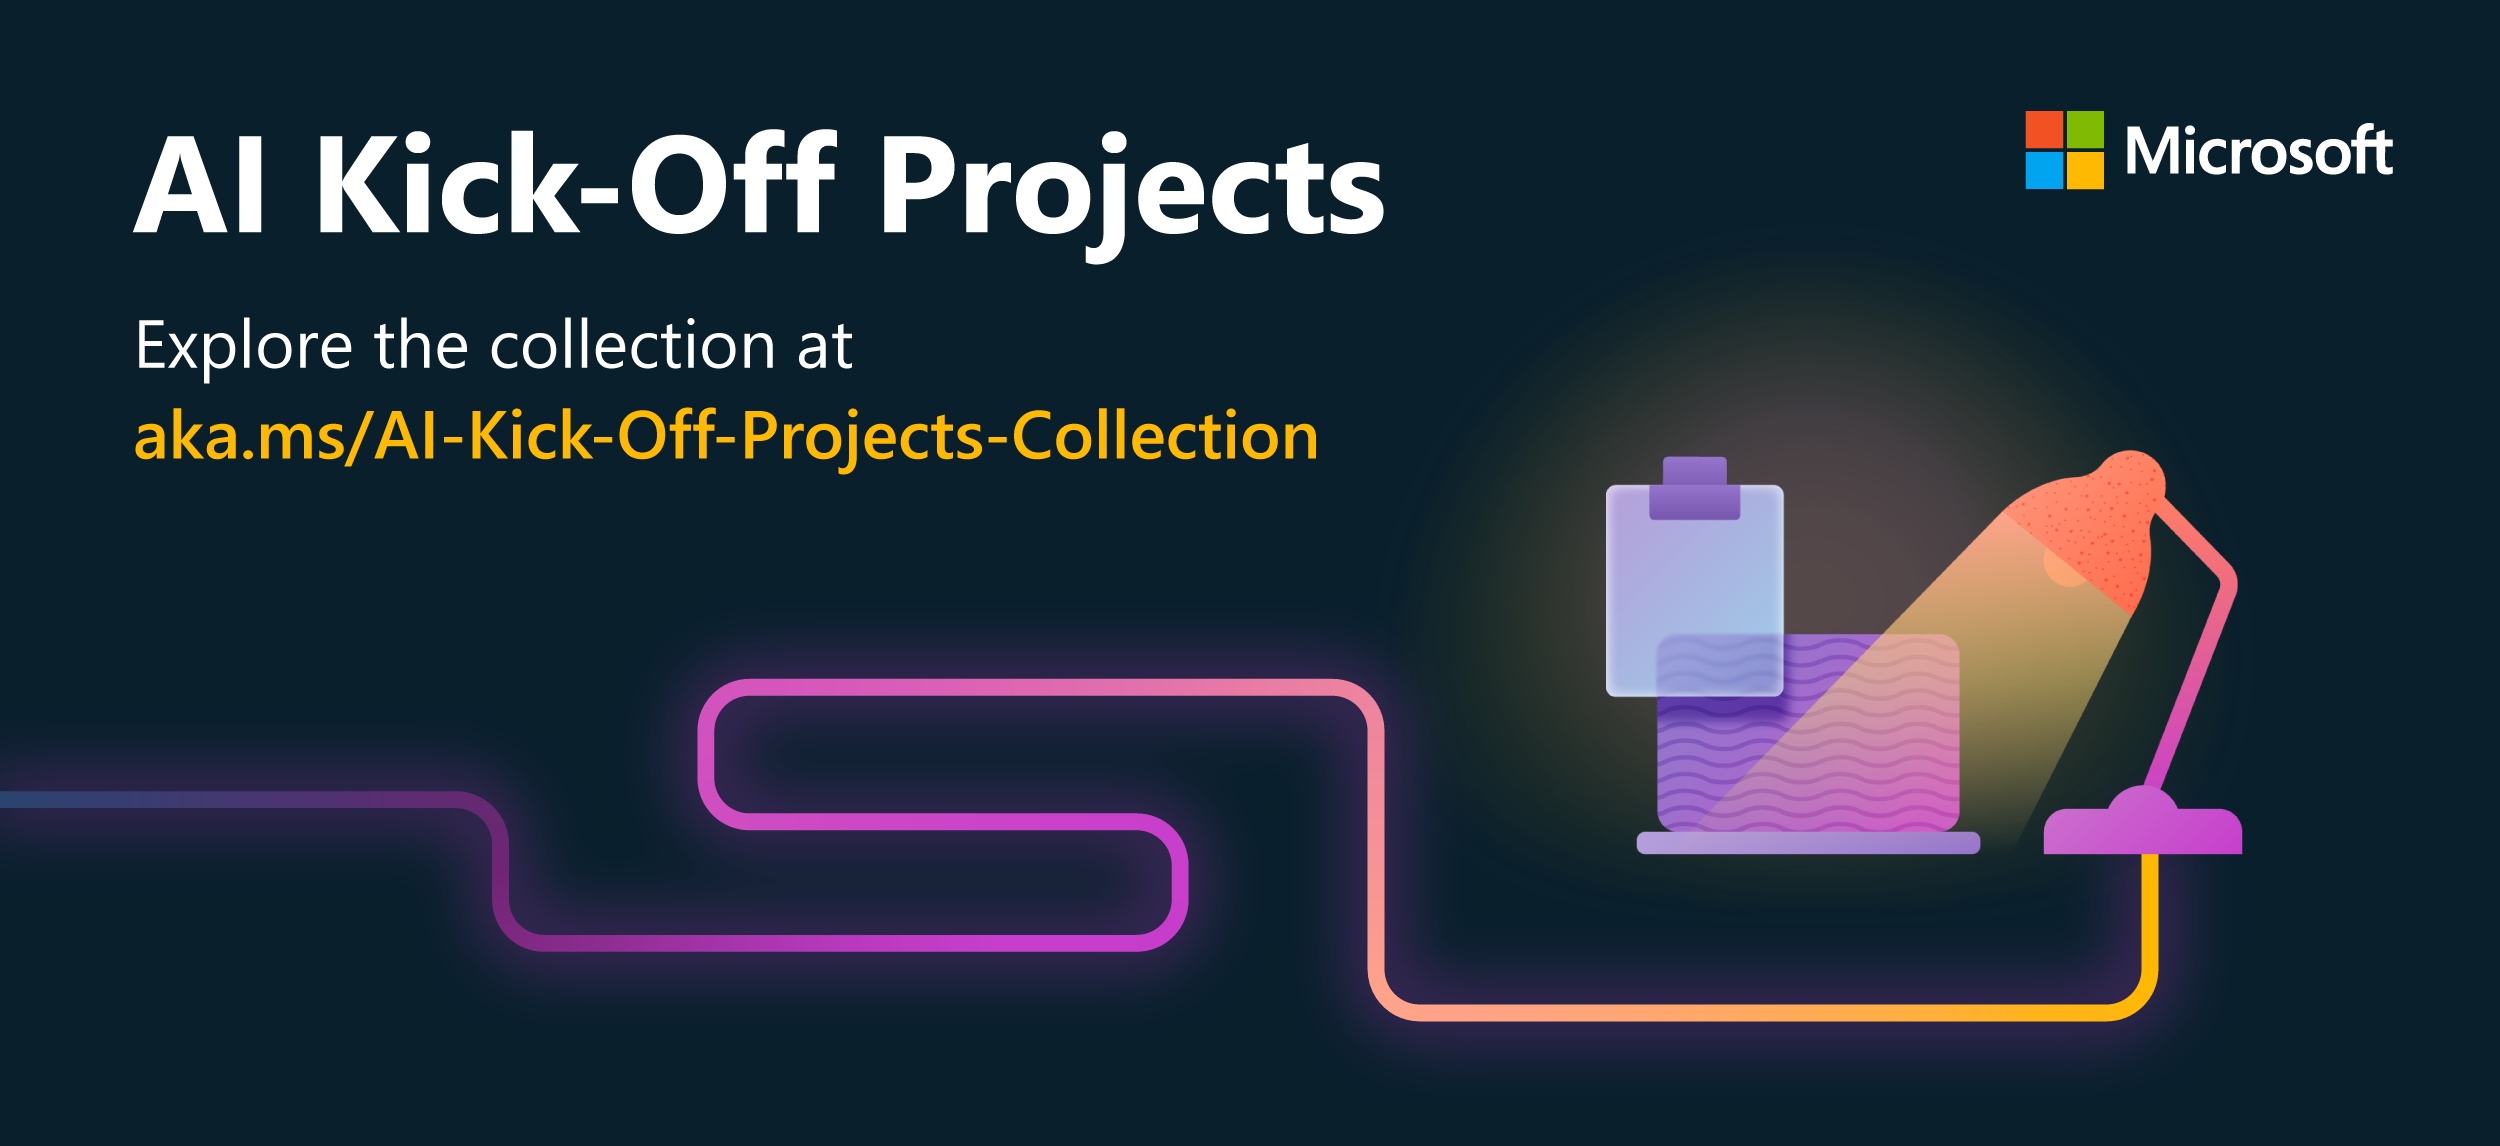 AI Kick-off Projects Graphic